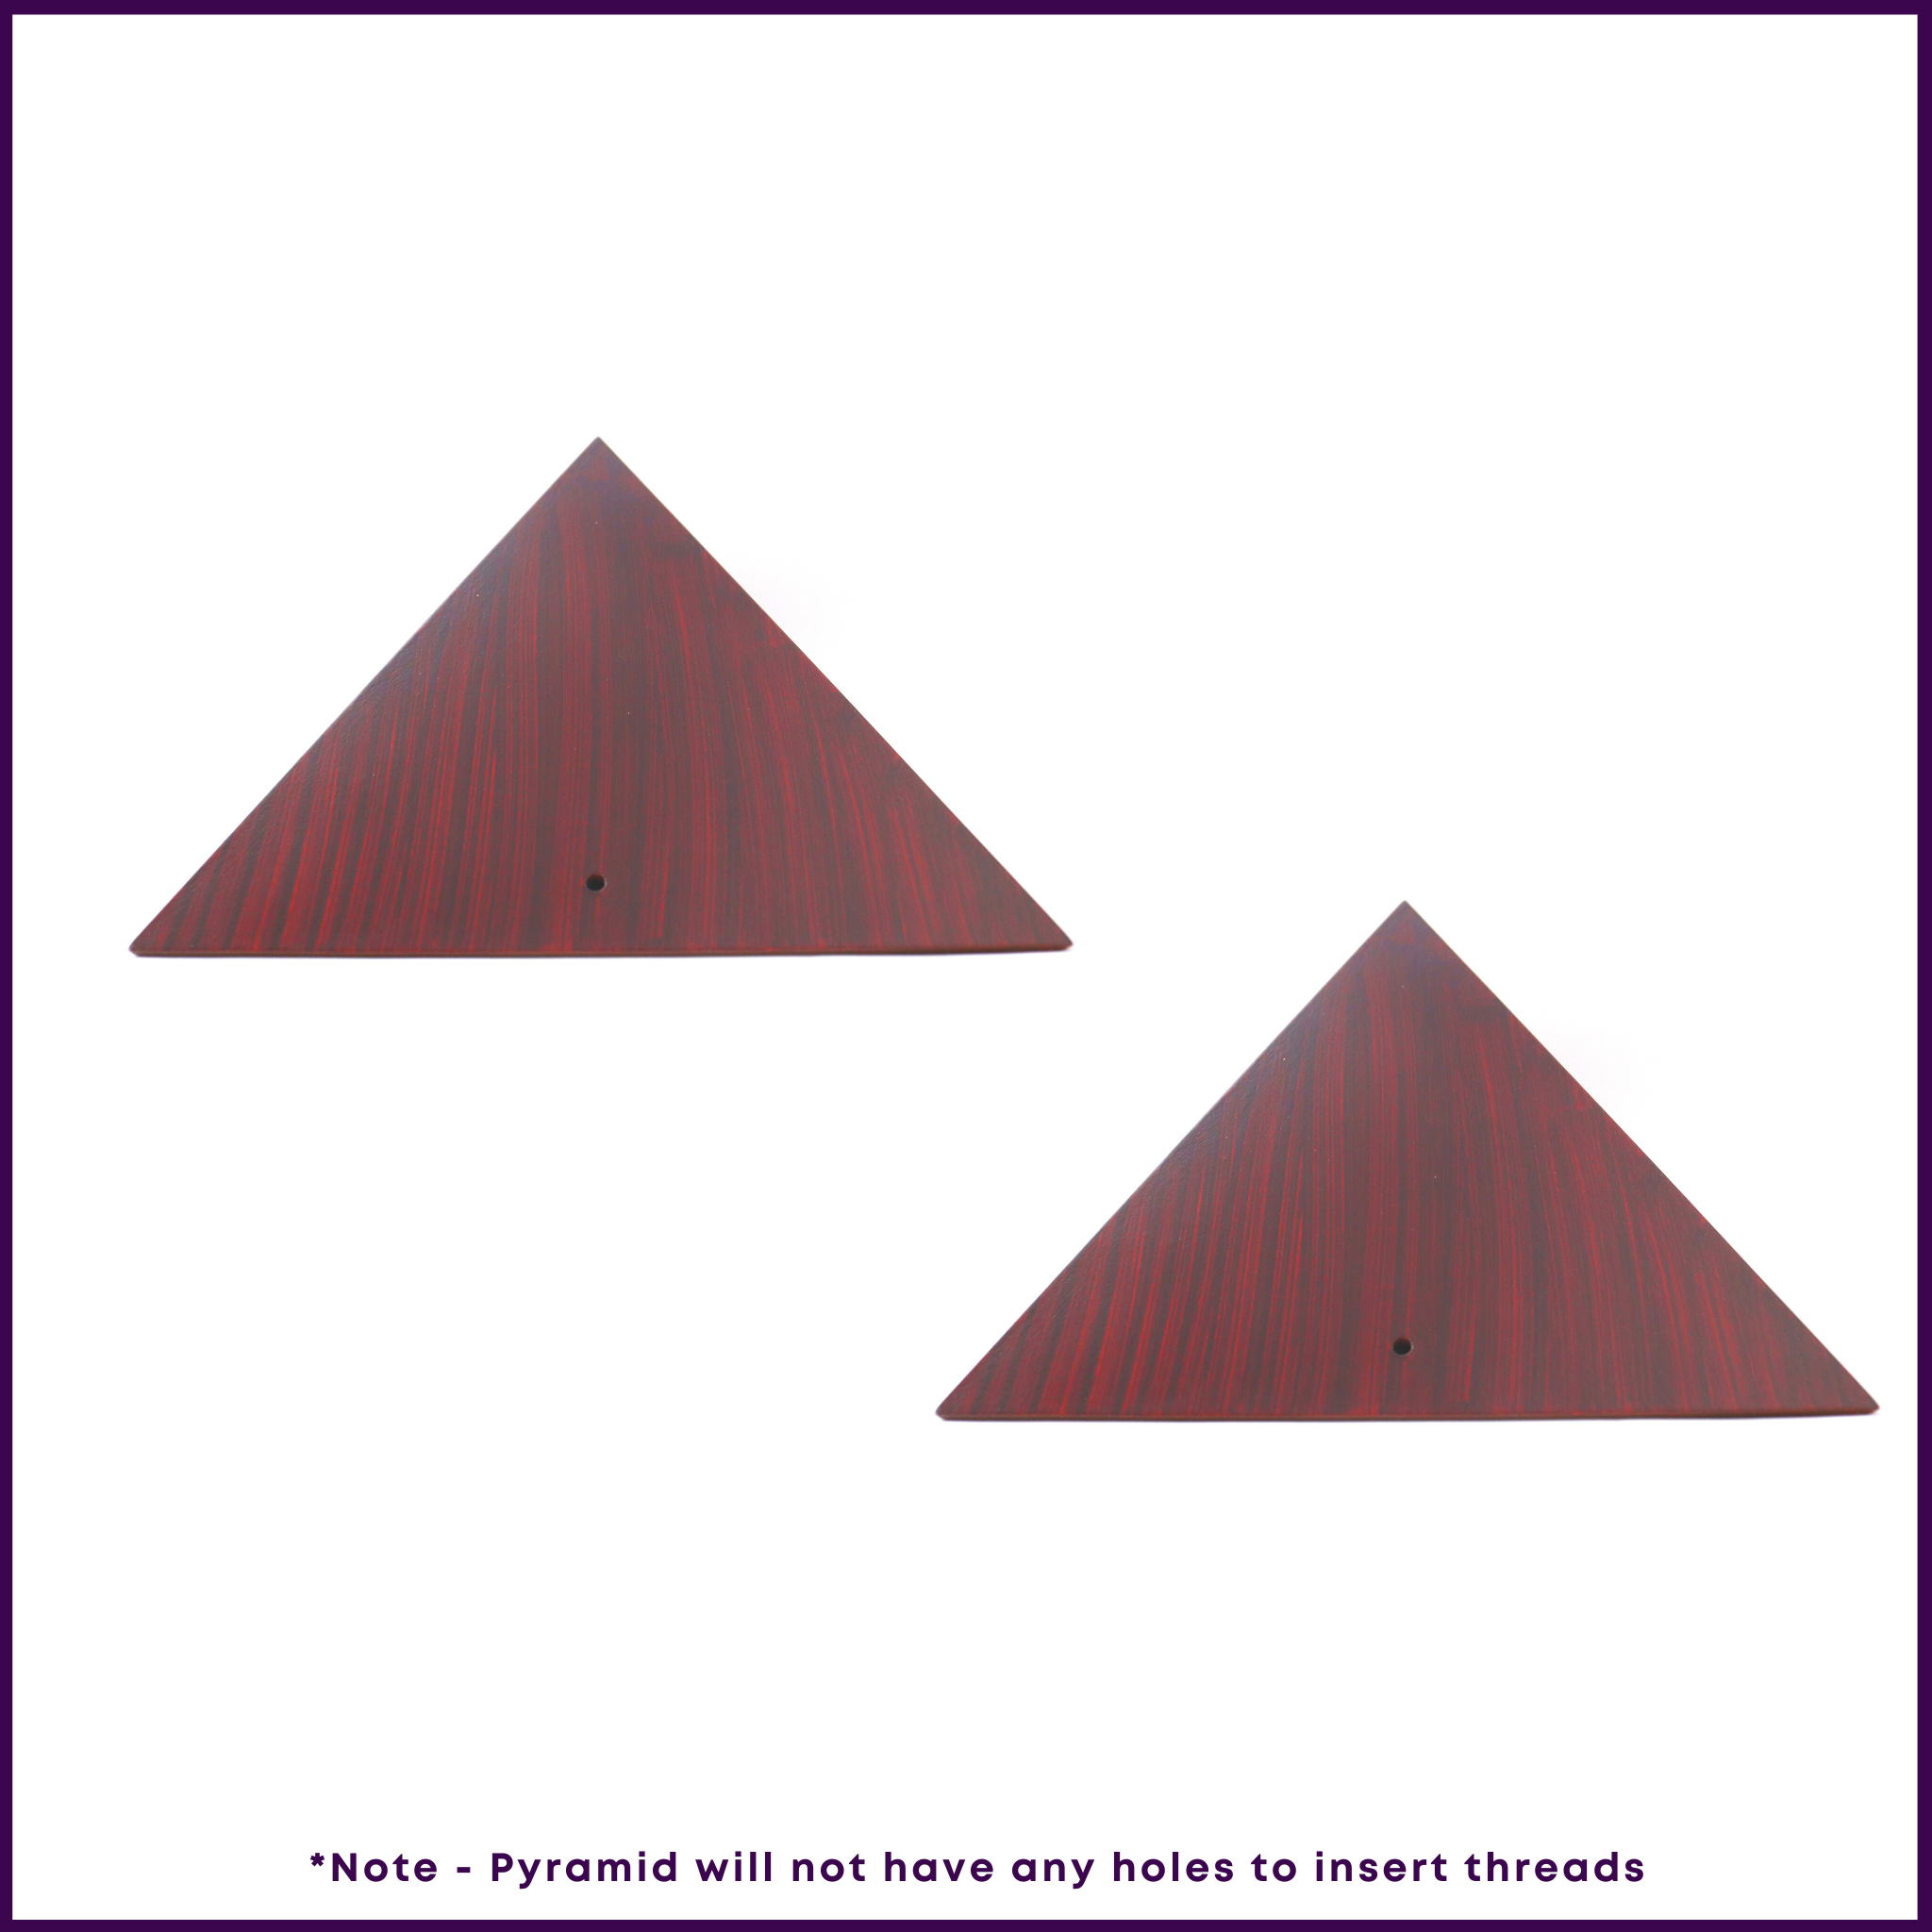 Set of 4 - 6inch MDF Wood Pyramid Cap (Rose-wood color painted) - For Four Corners of Your Home/Roo, - 51pyramids